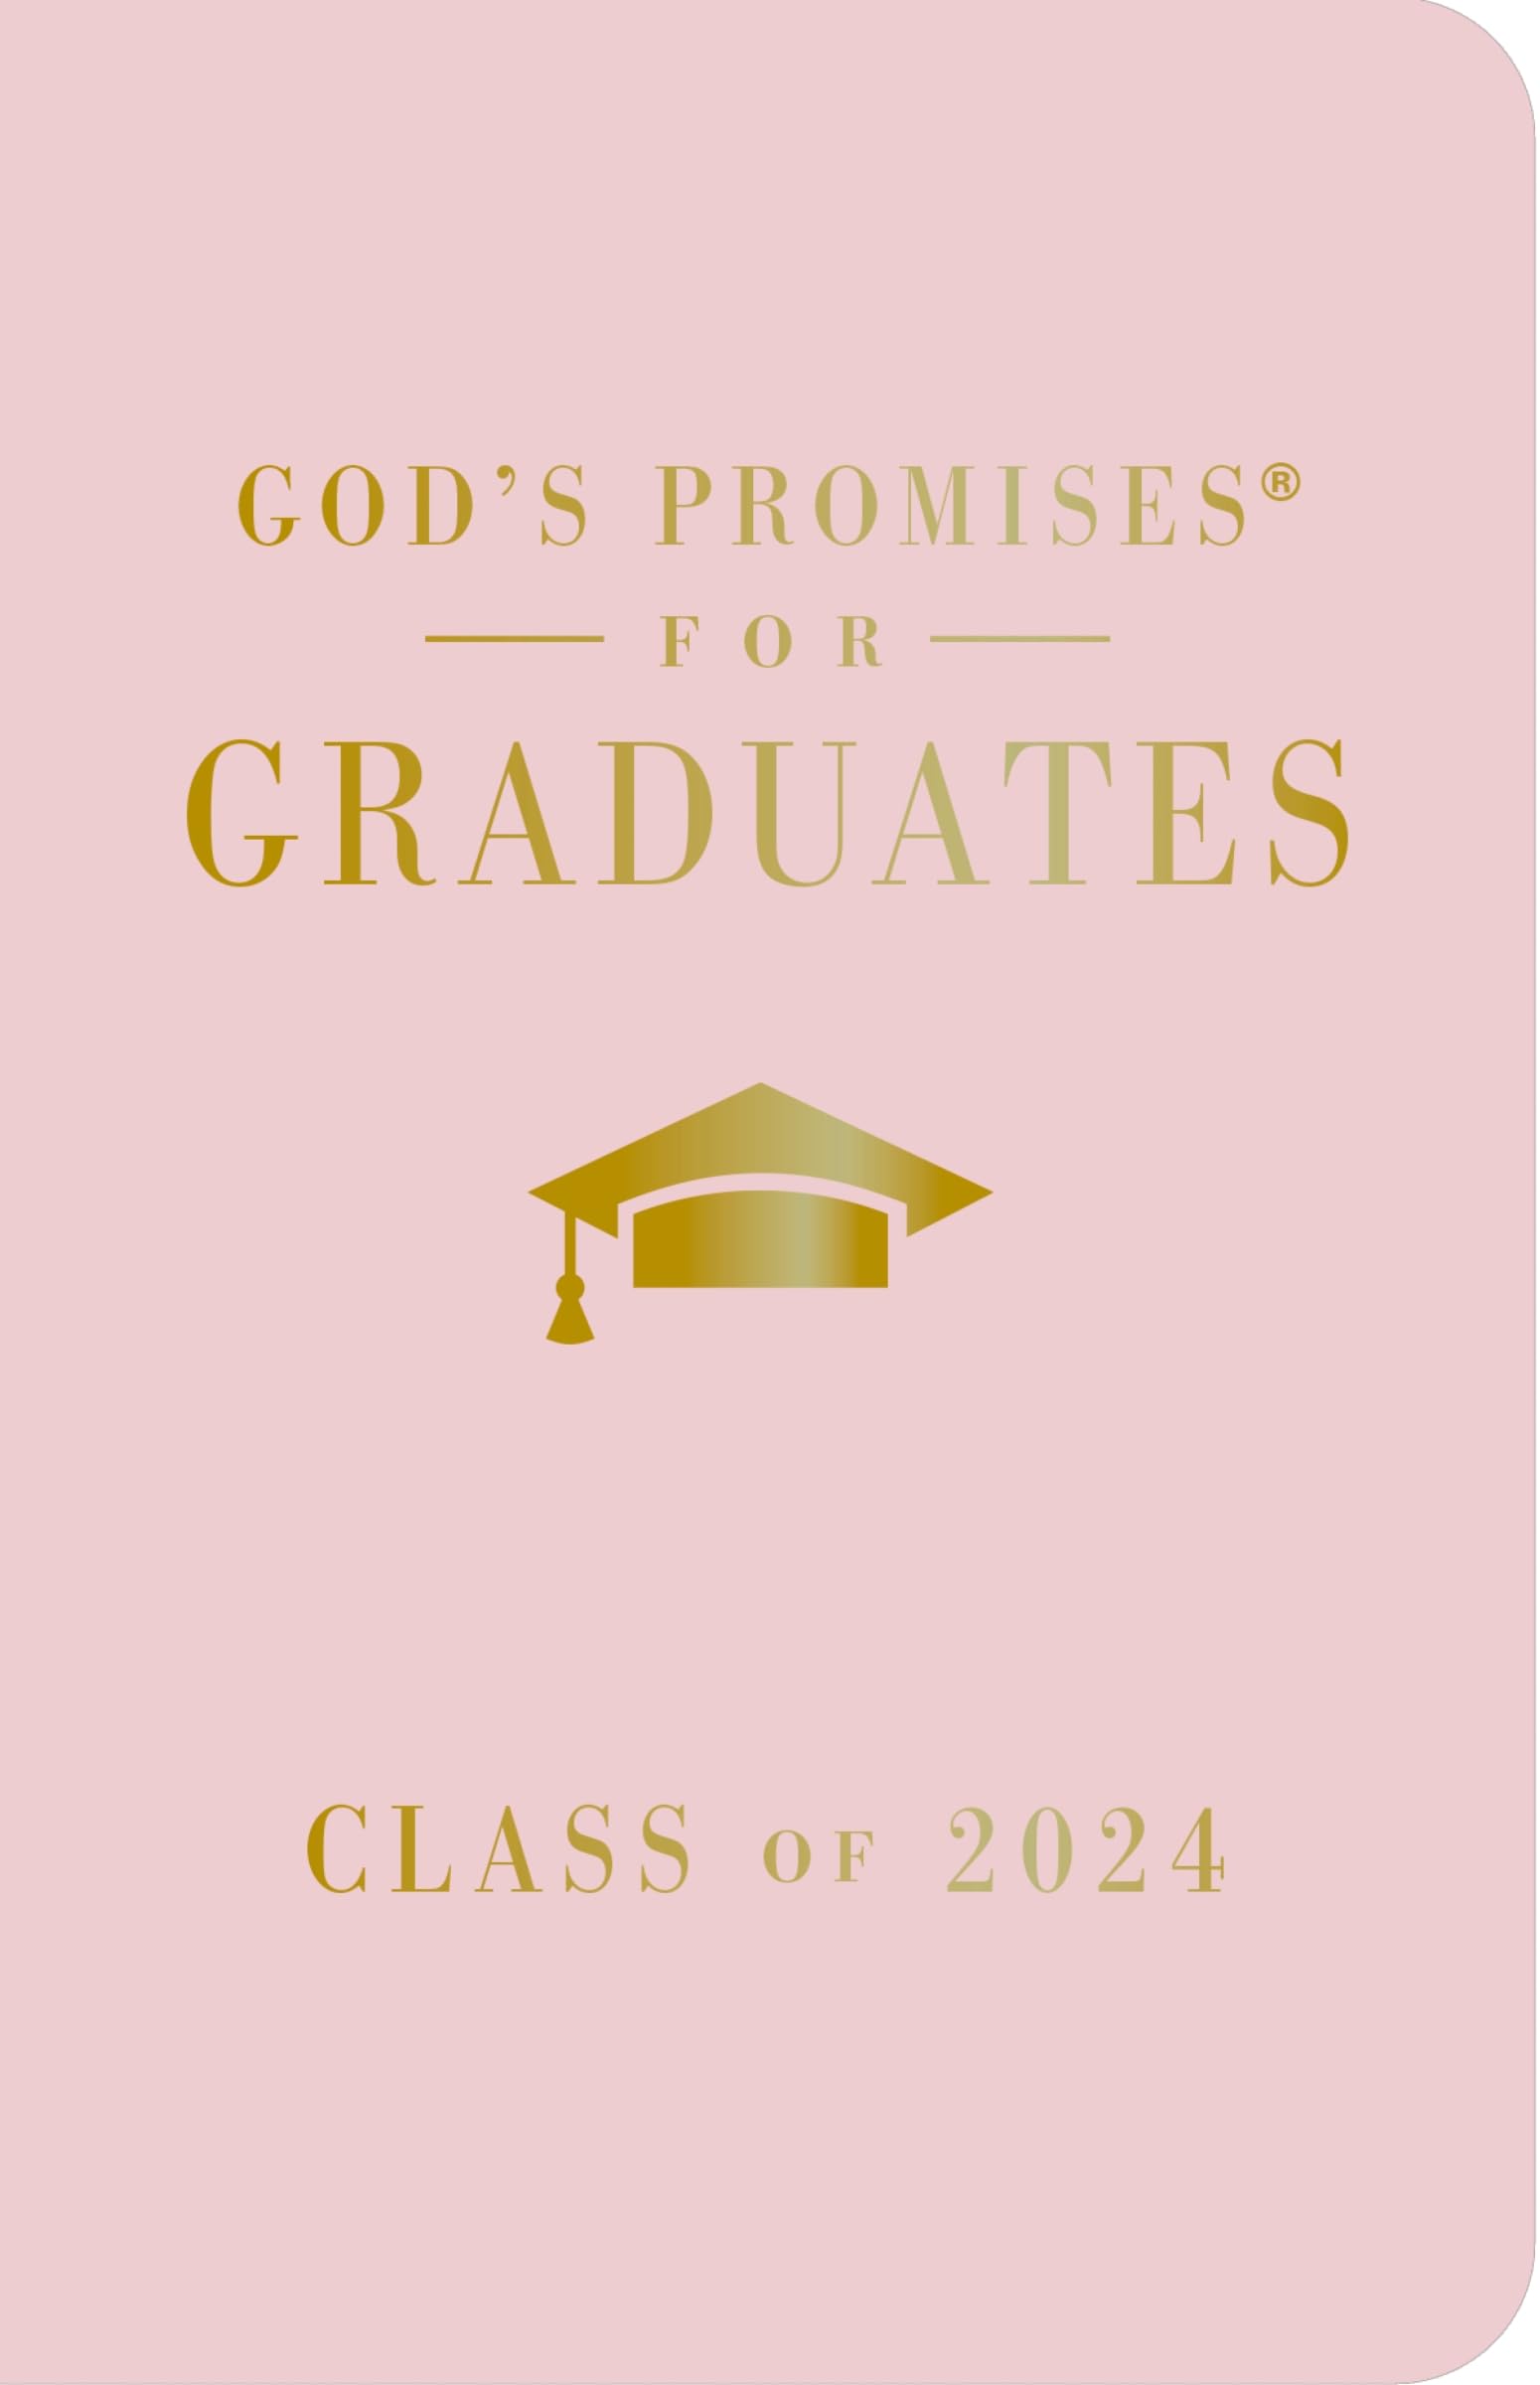 God's Promises for Graduates: Class of 2024 - Pink NKJV: New King James Version by Countryman, Jack